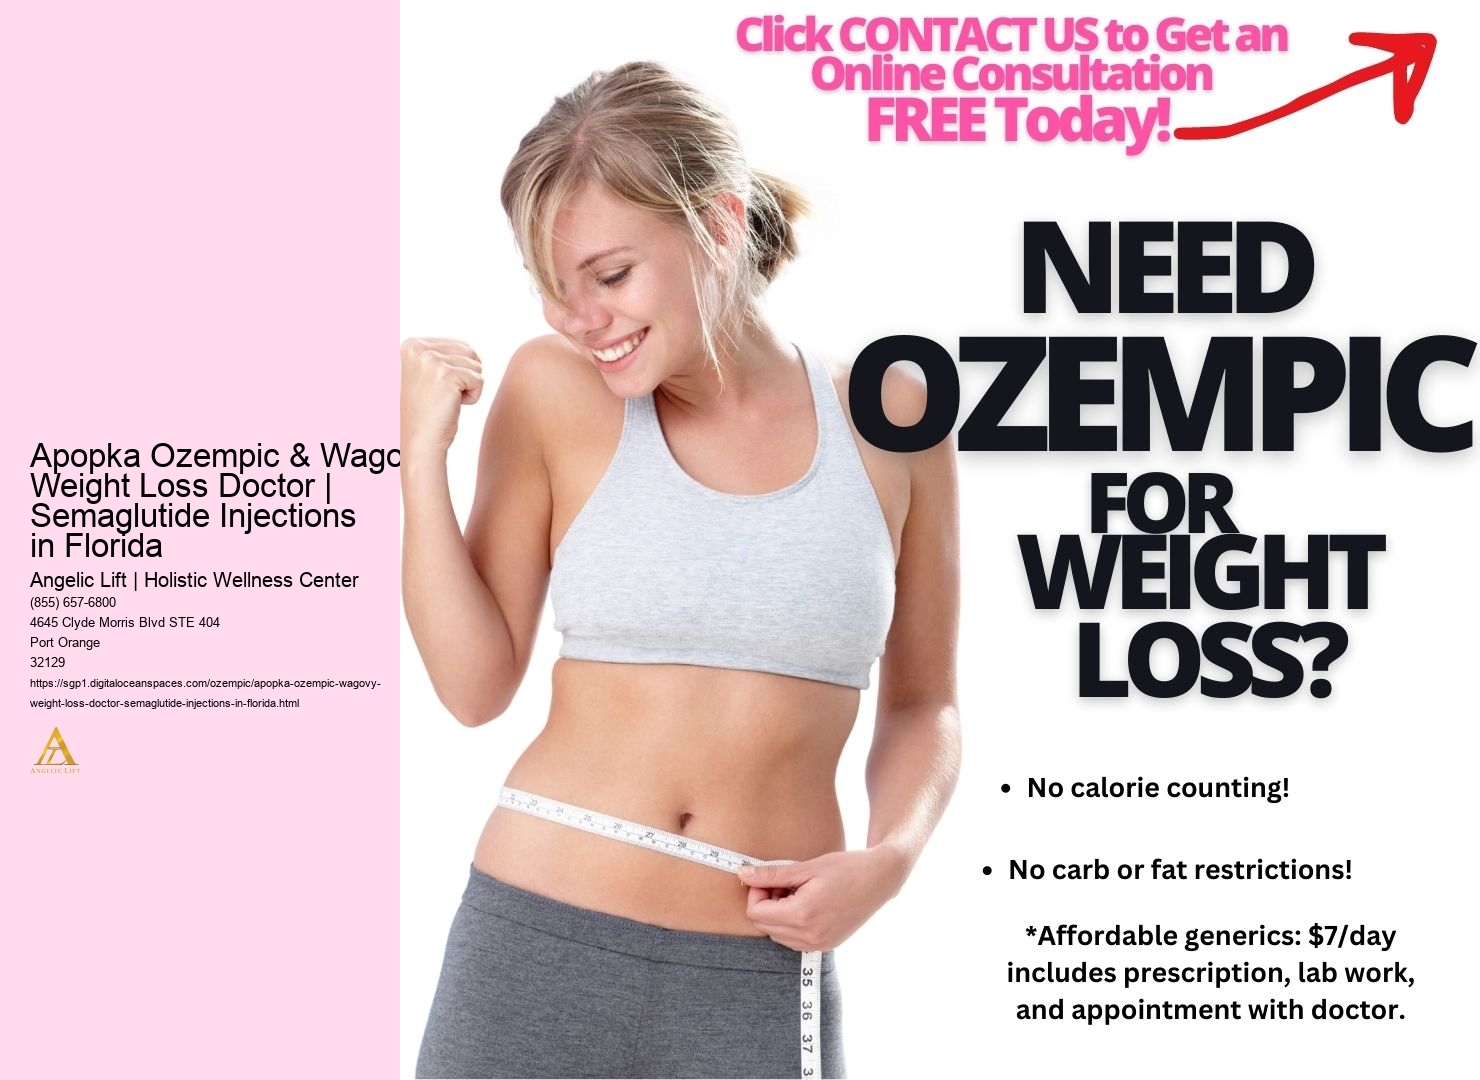 Apopka Ozempic & Wagovy Weight Loss Doctor | Semaglutide Injections in Florida